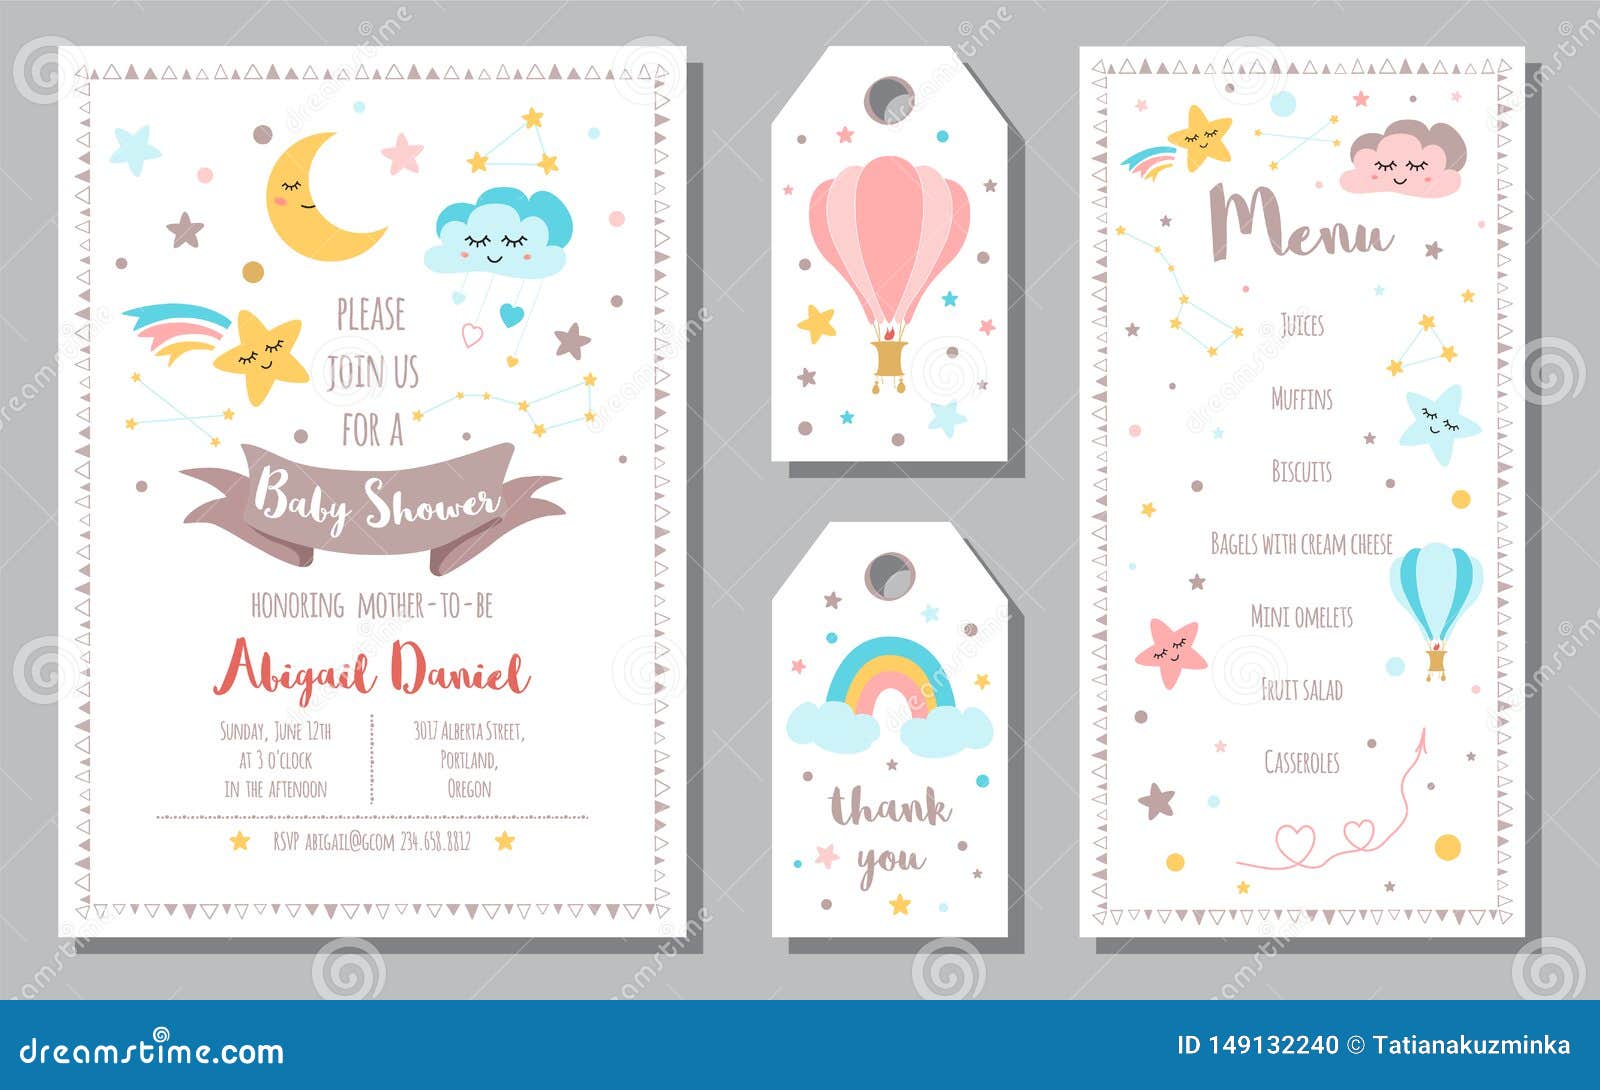 Baby Shower Invitation Templates Banners Menu, Thank You Moon Star Throughout Baby Shower Menu Template Free